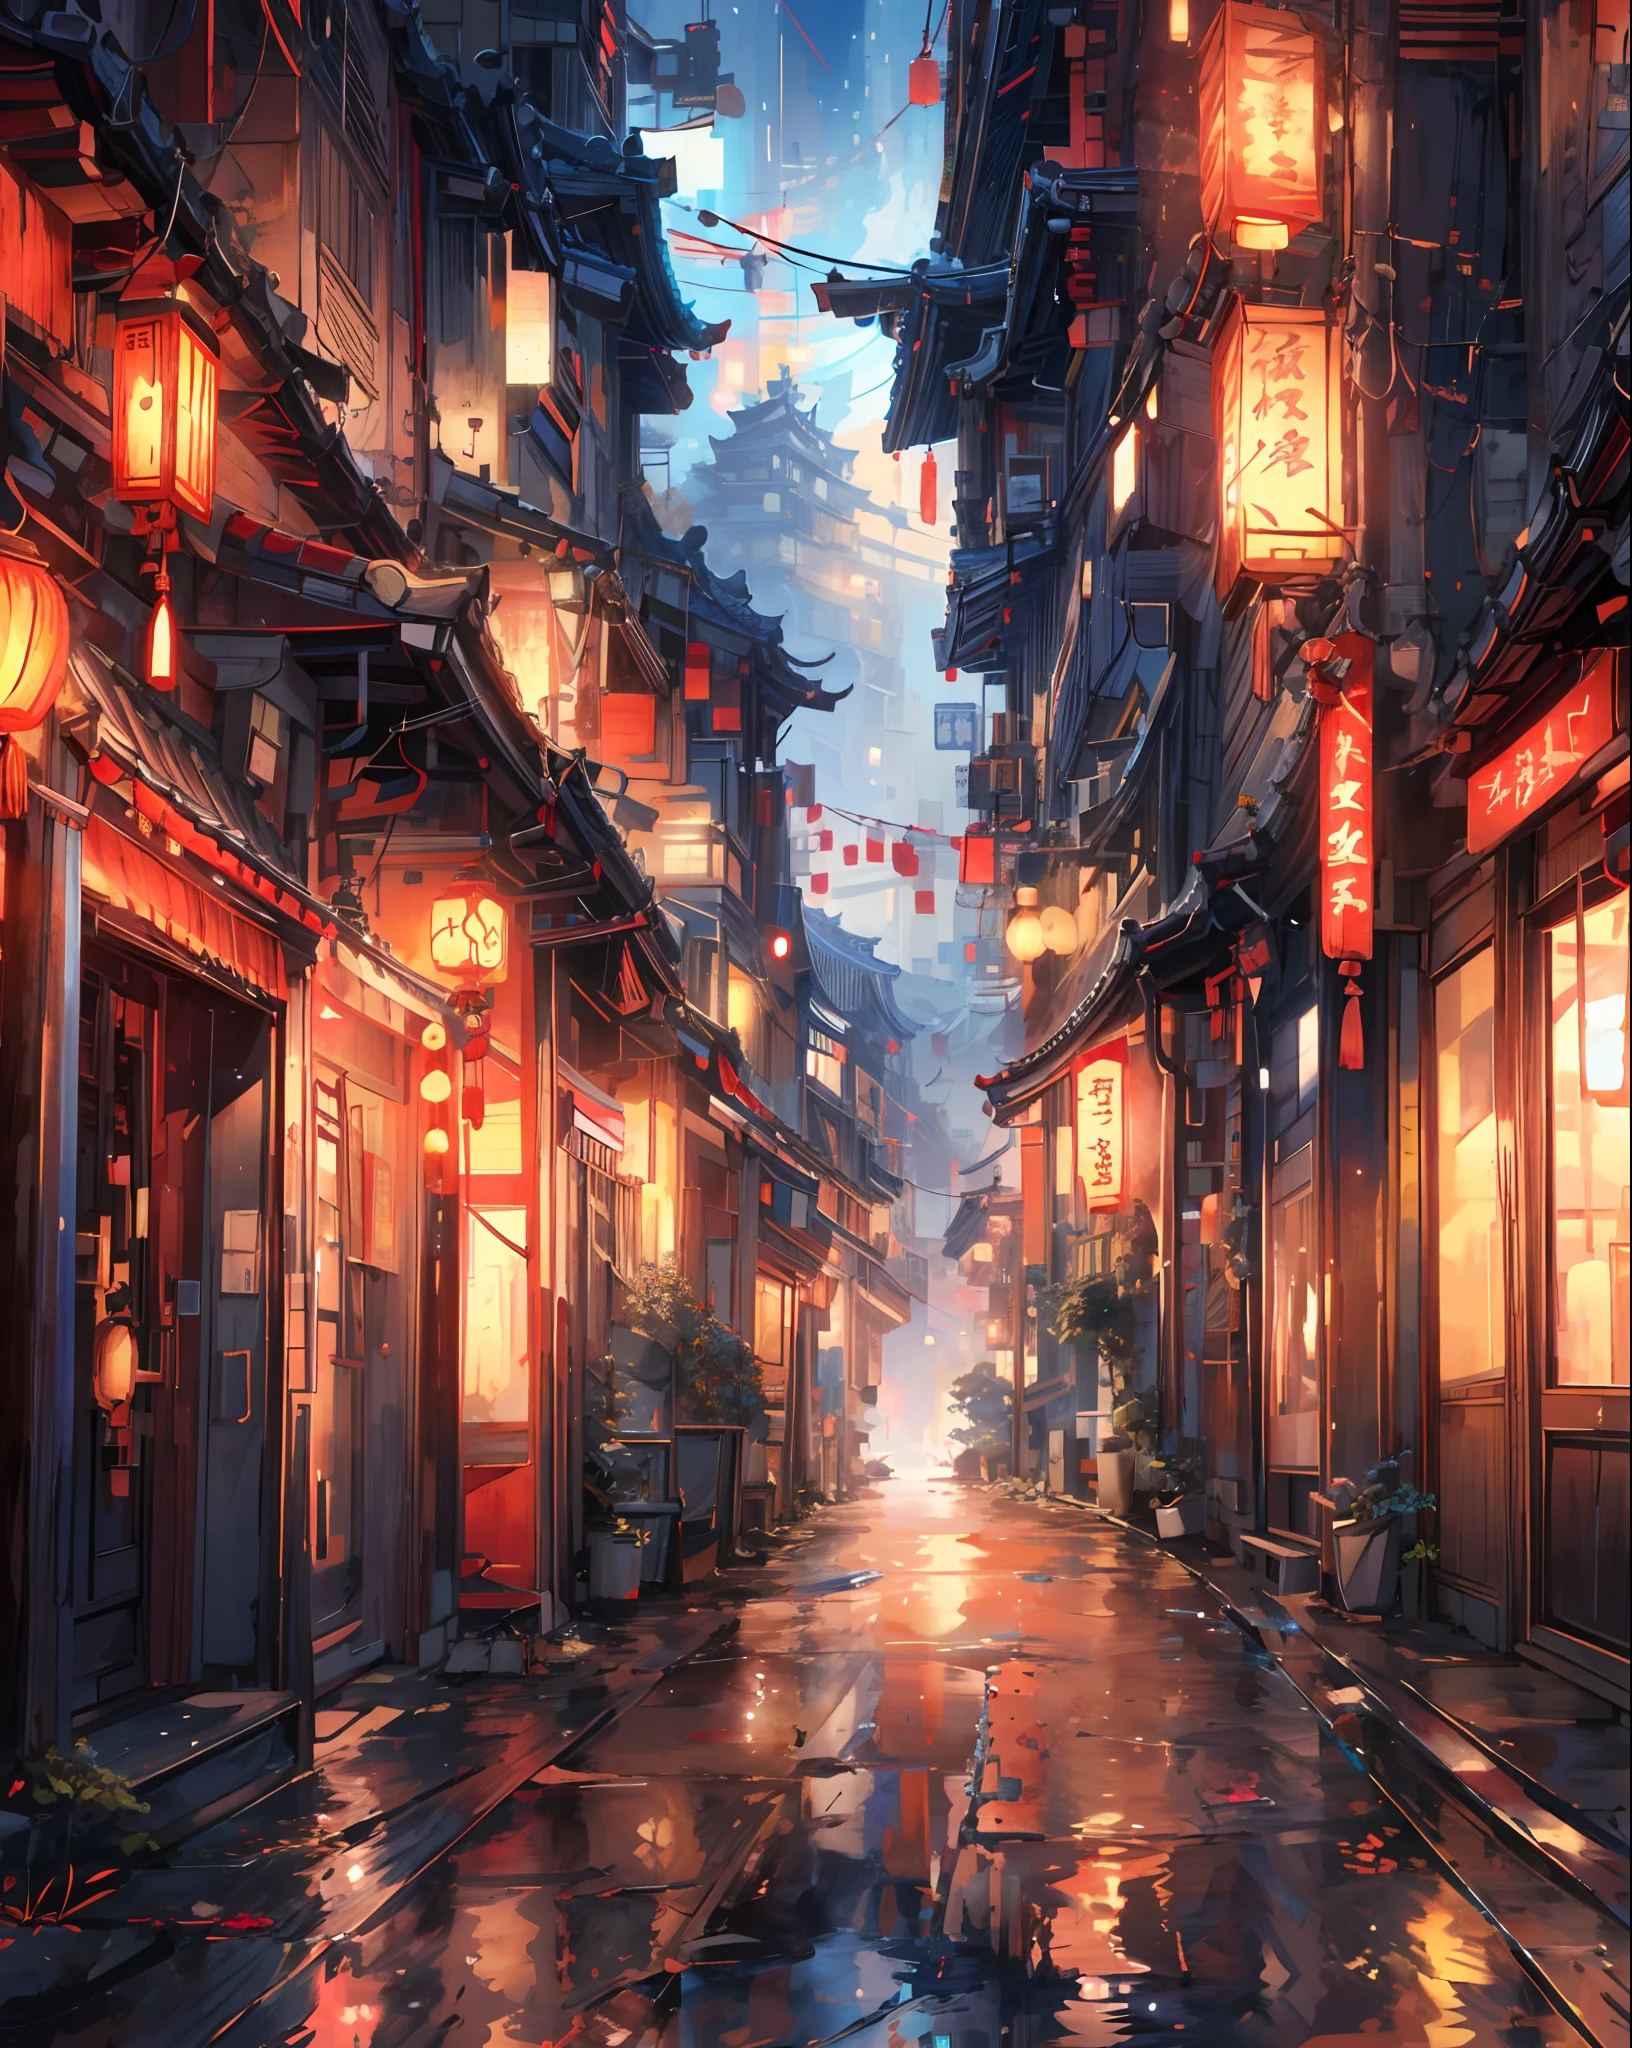 Change of Scenery | Anime scenery, Anime background, Anime places